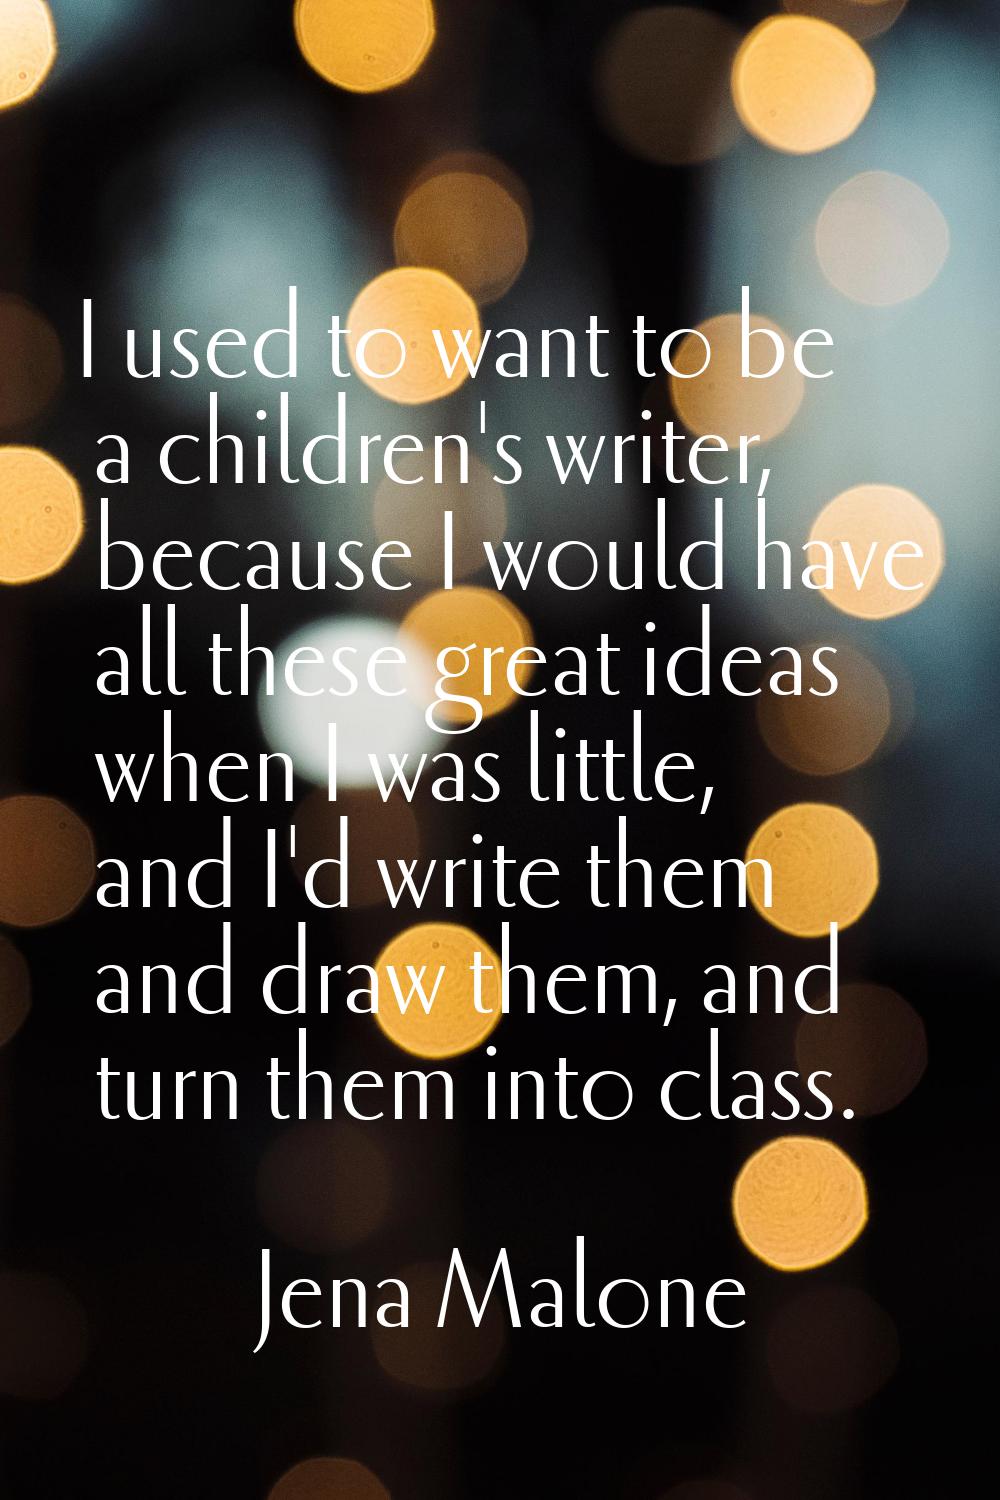 I used to want to be a children's writer, because I would have all these great ideas when I was lit